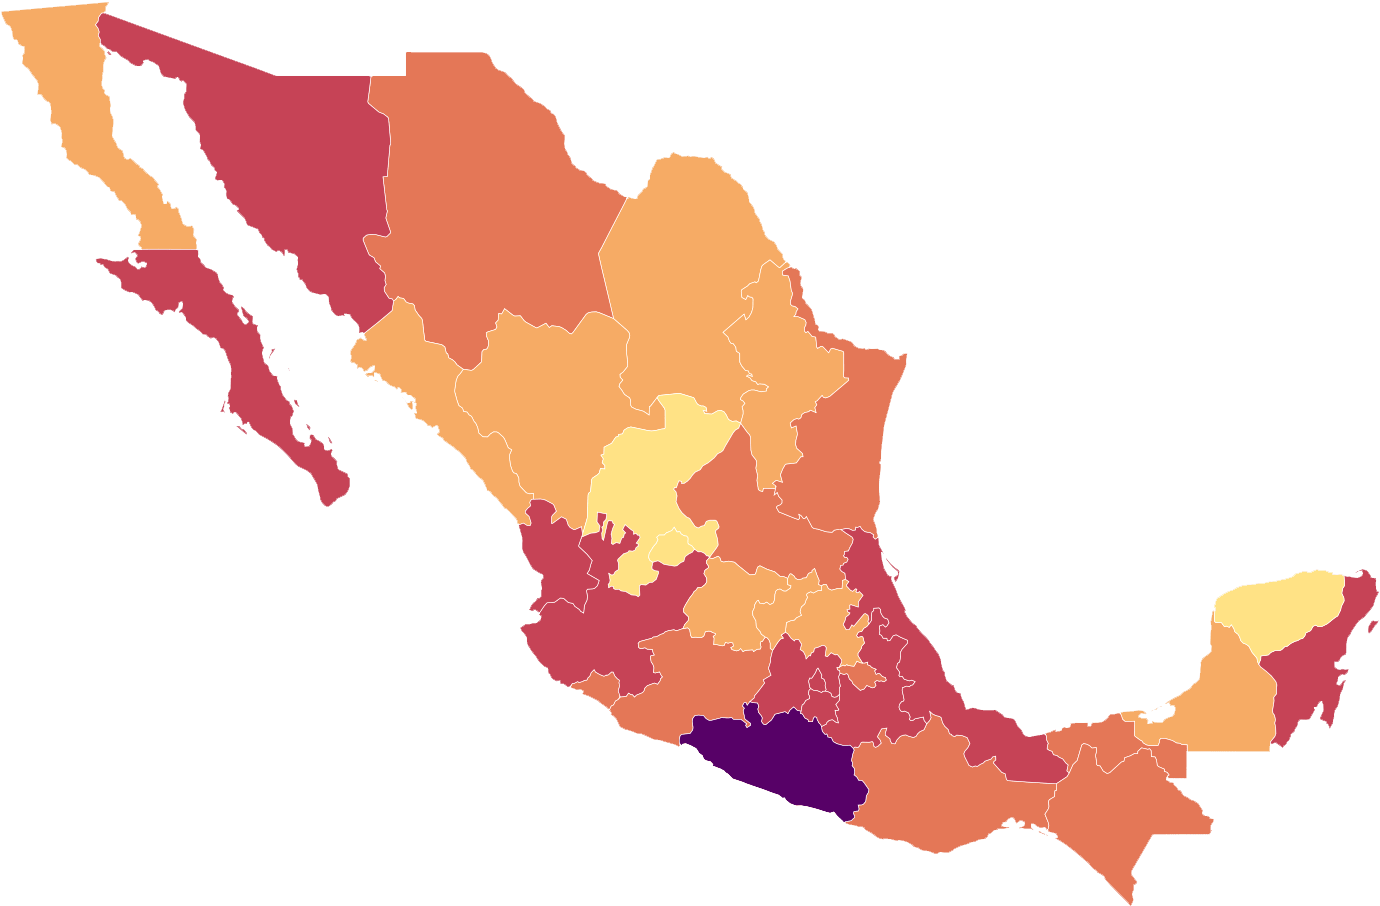 Mexico Color Coded Map